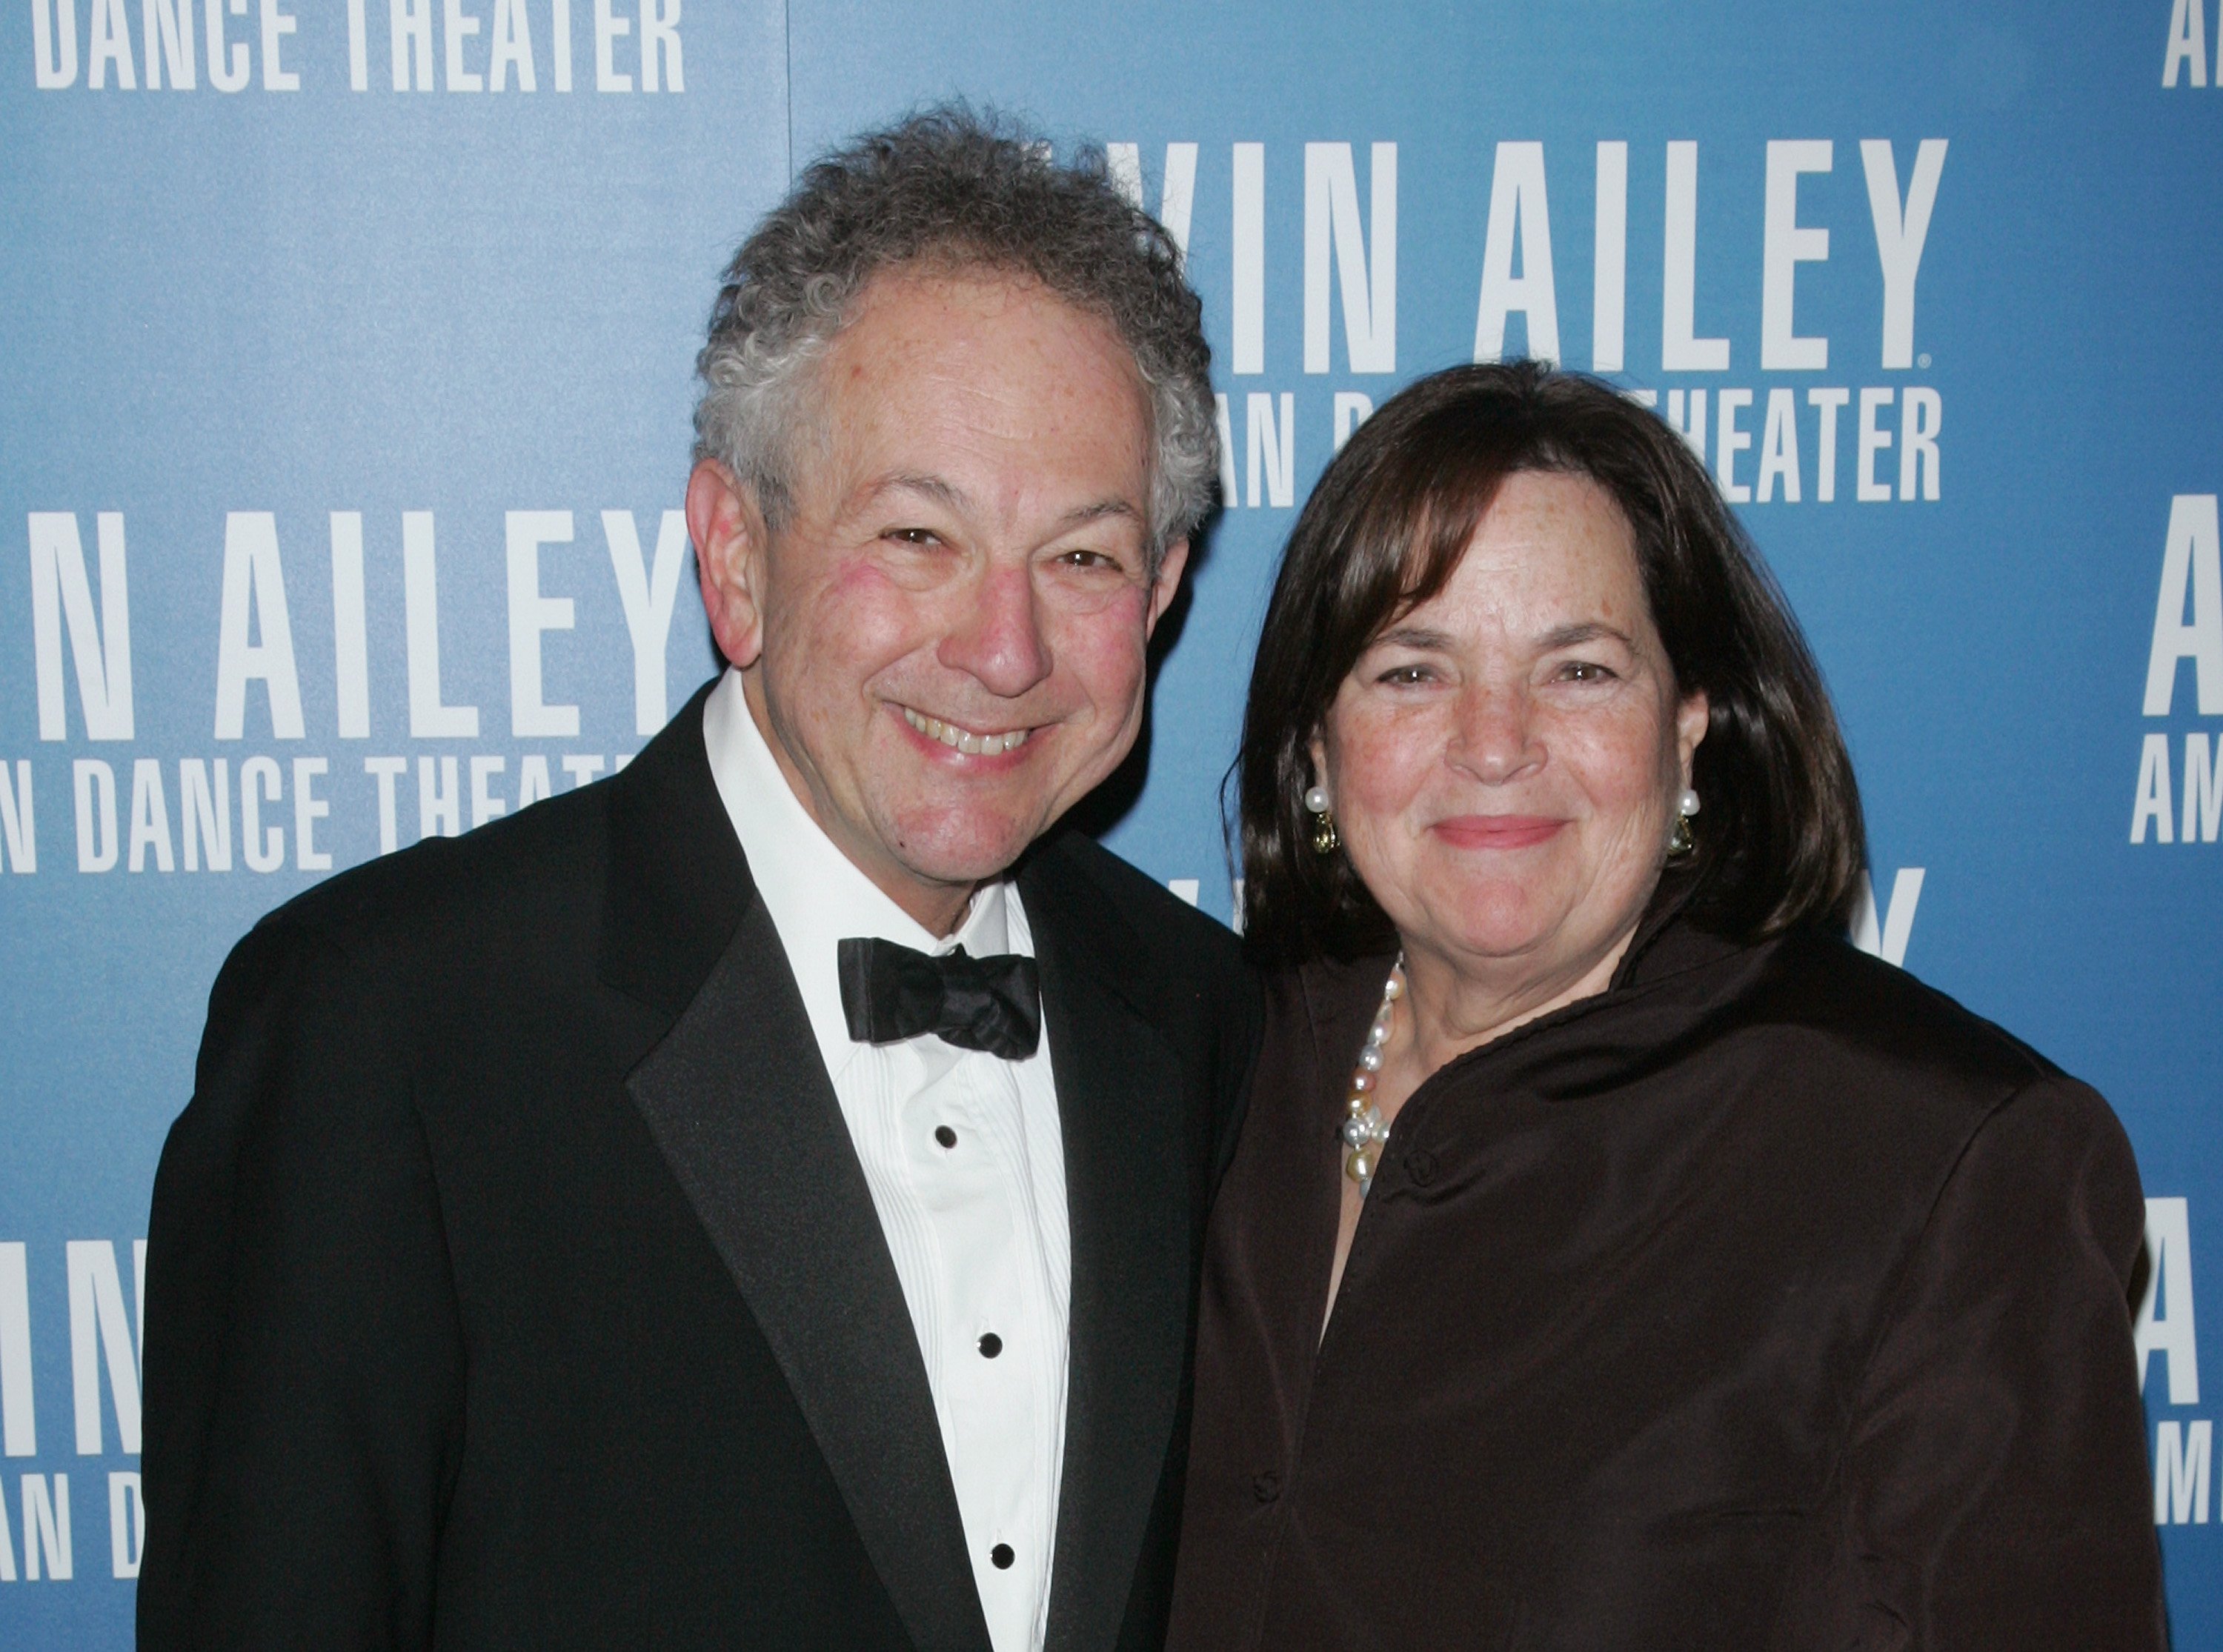 Jeffrey and Ina Garten attends the Alvin Ailey American Dance Theater Opening Night Gala on November 28, 2012, in New York City | Source: Getty Images.